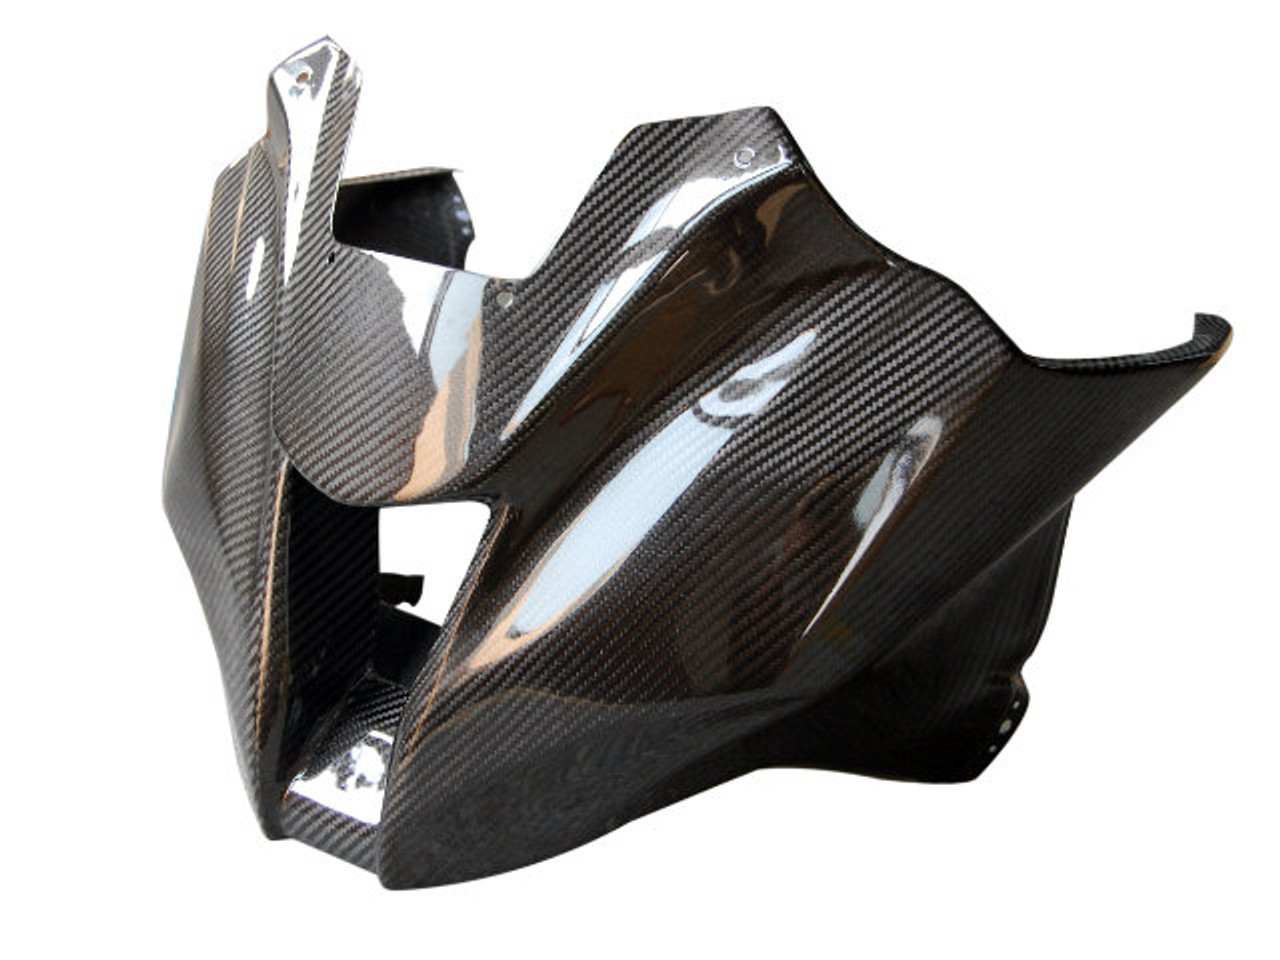 Top Fairing ( Racing) in Glossy Twill Weave Carbon Fiber for Kawasaki ZX10R 2011-2015